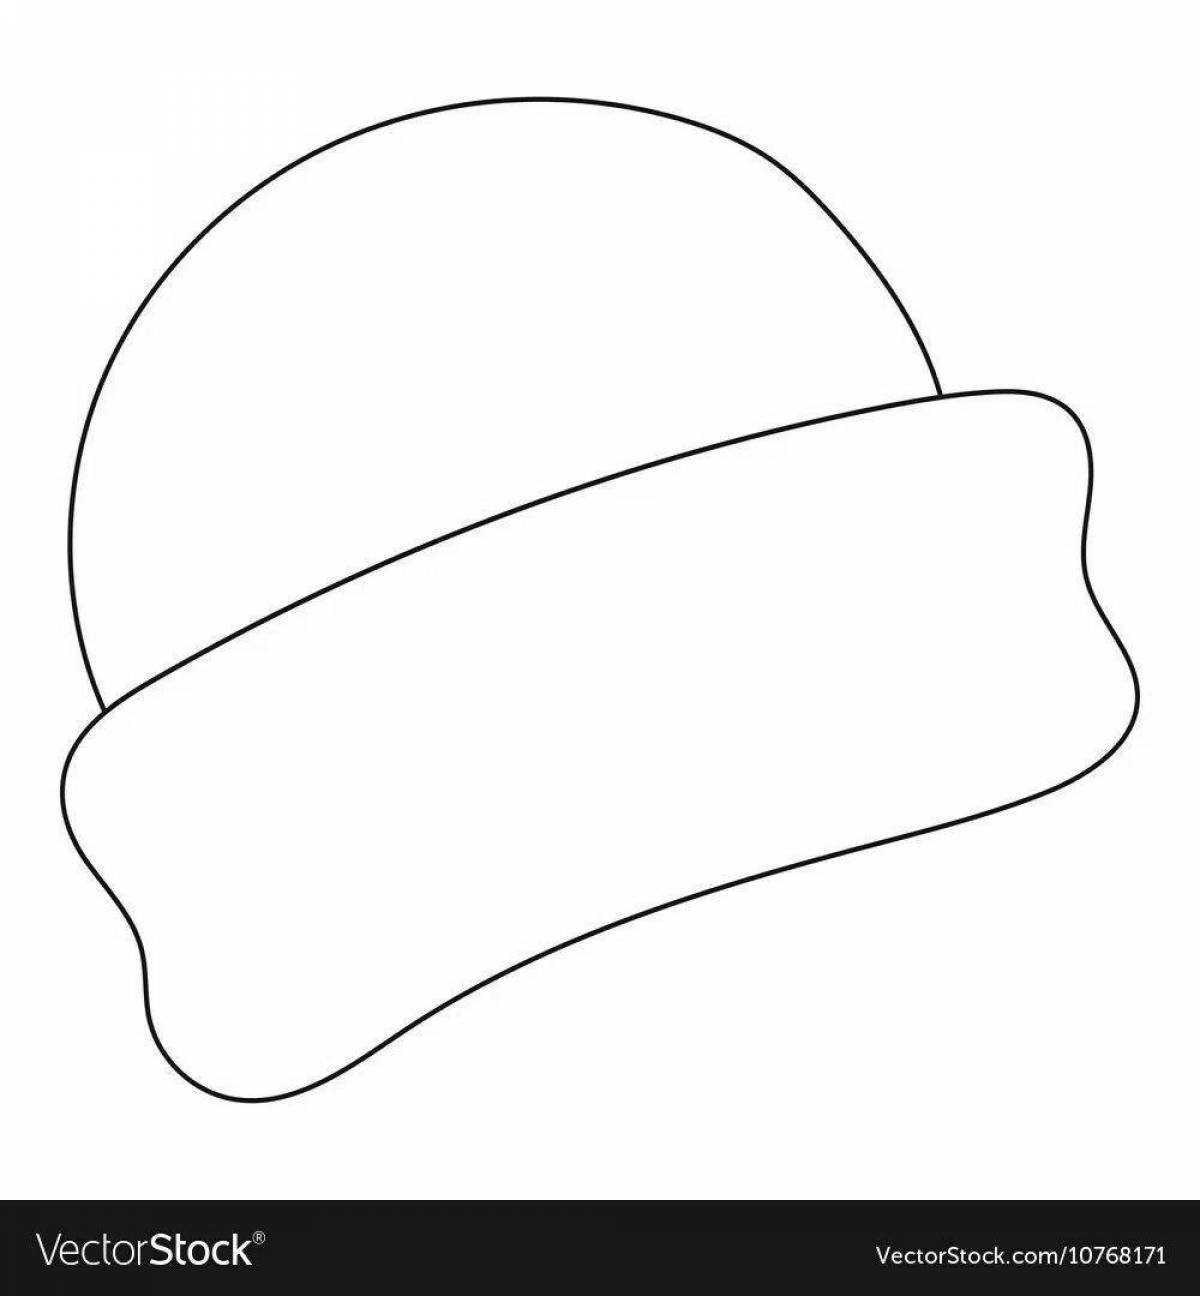 Detailed drawing of a skullcap for children